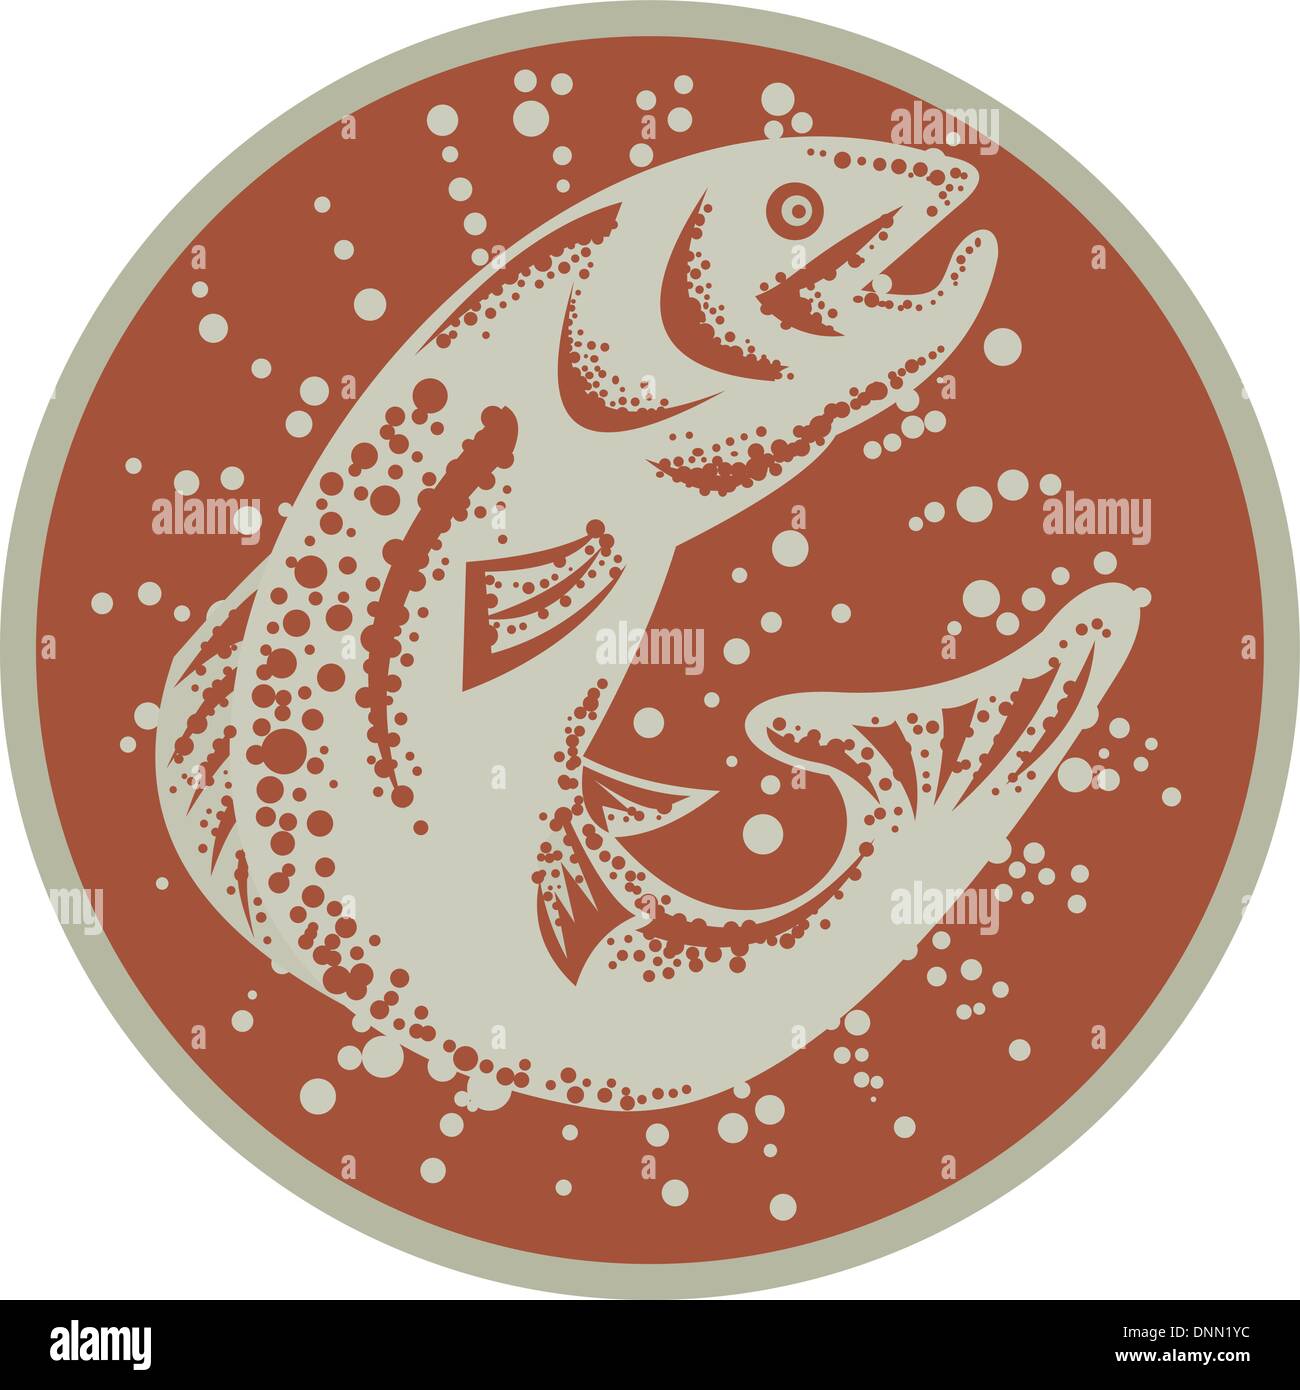 Illustration of a trout fish jumping set inside circle on isolated white background done in retro style. Stock Vector